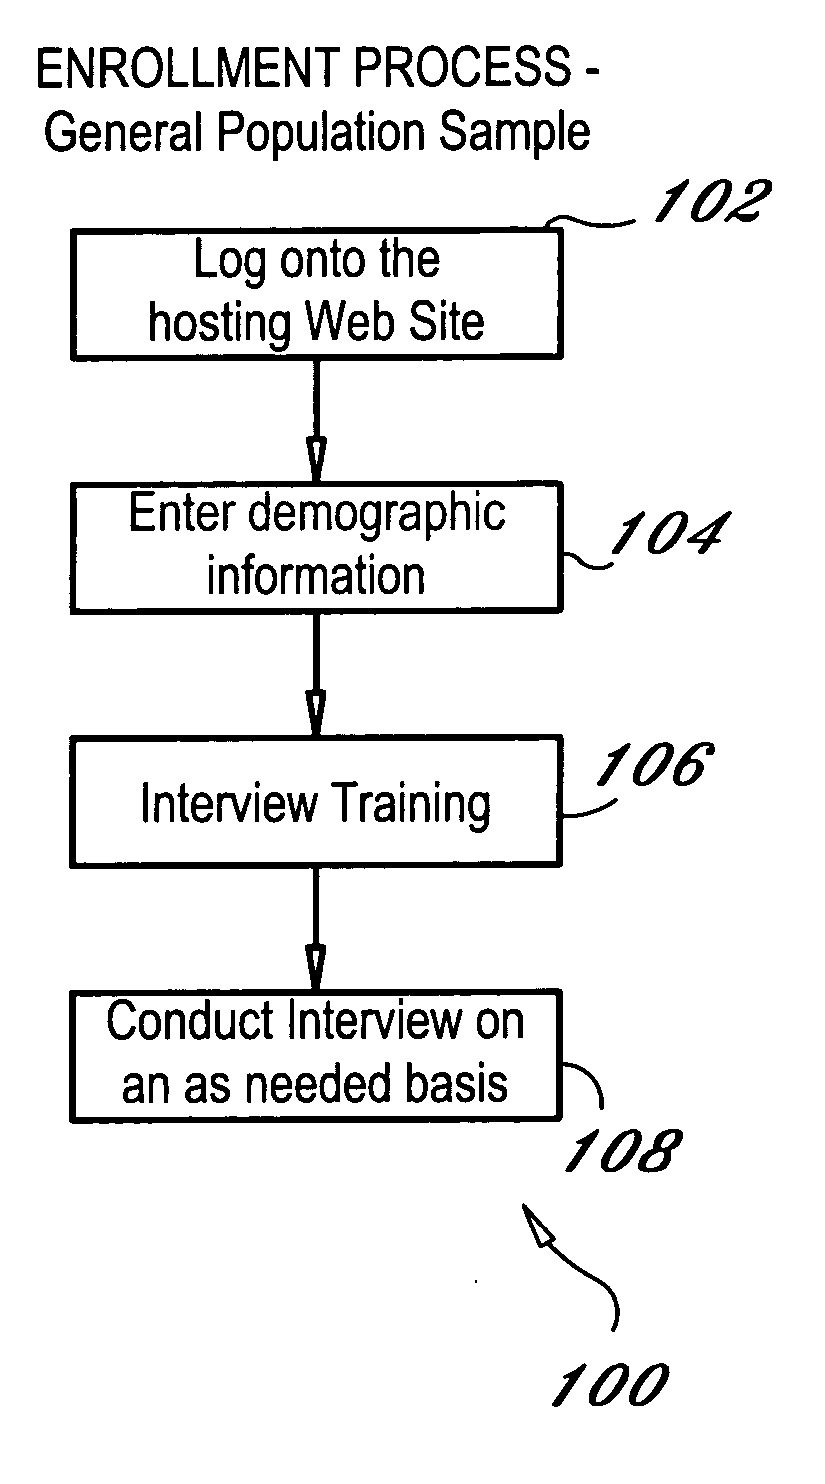 Internet based qualitative research method and system and Synchronous and Asynchronous audio and video message board